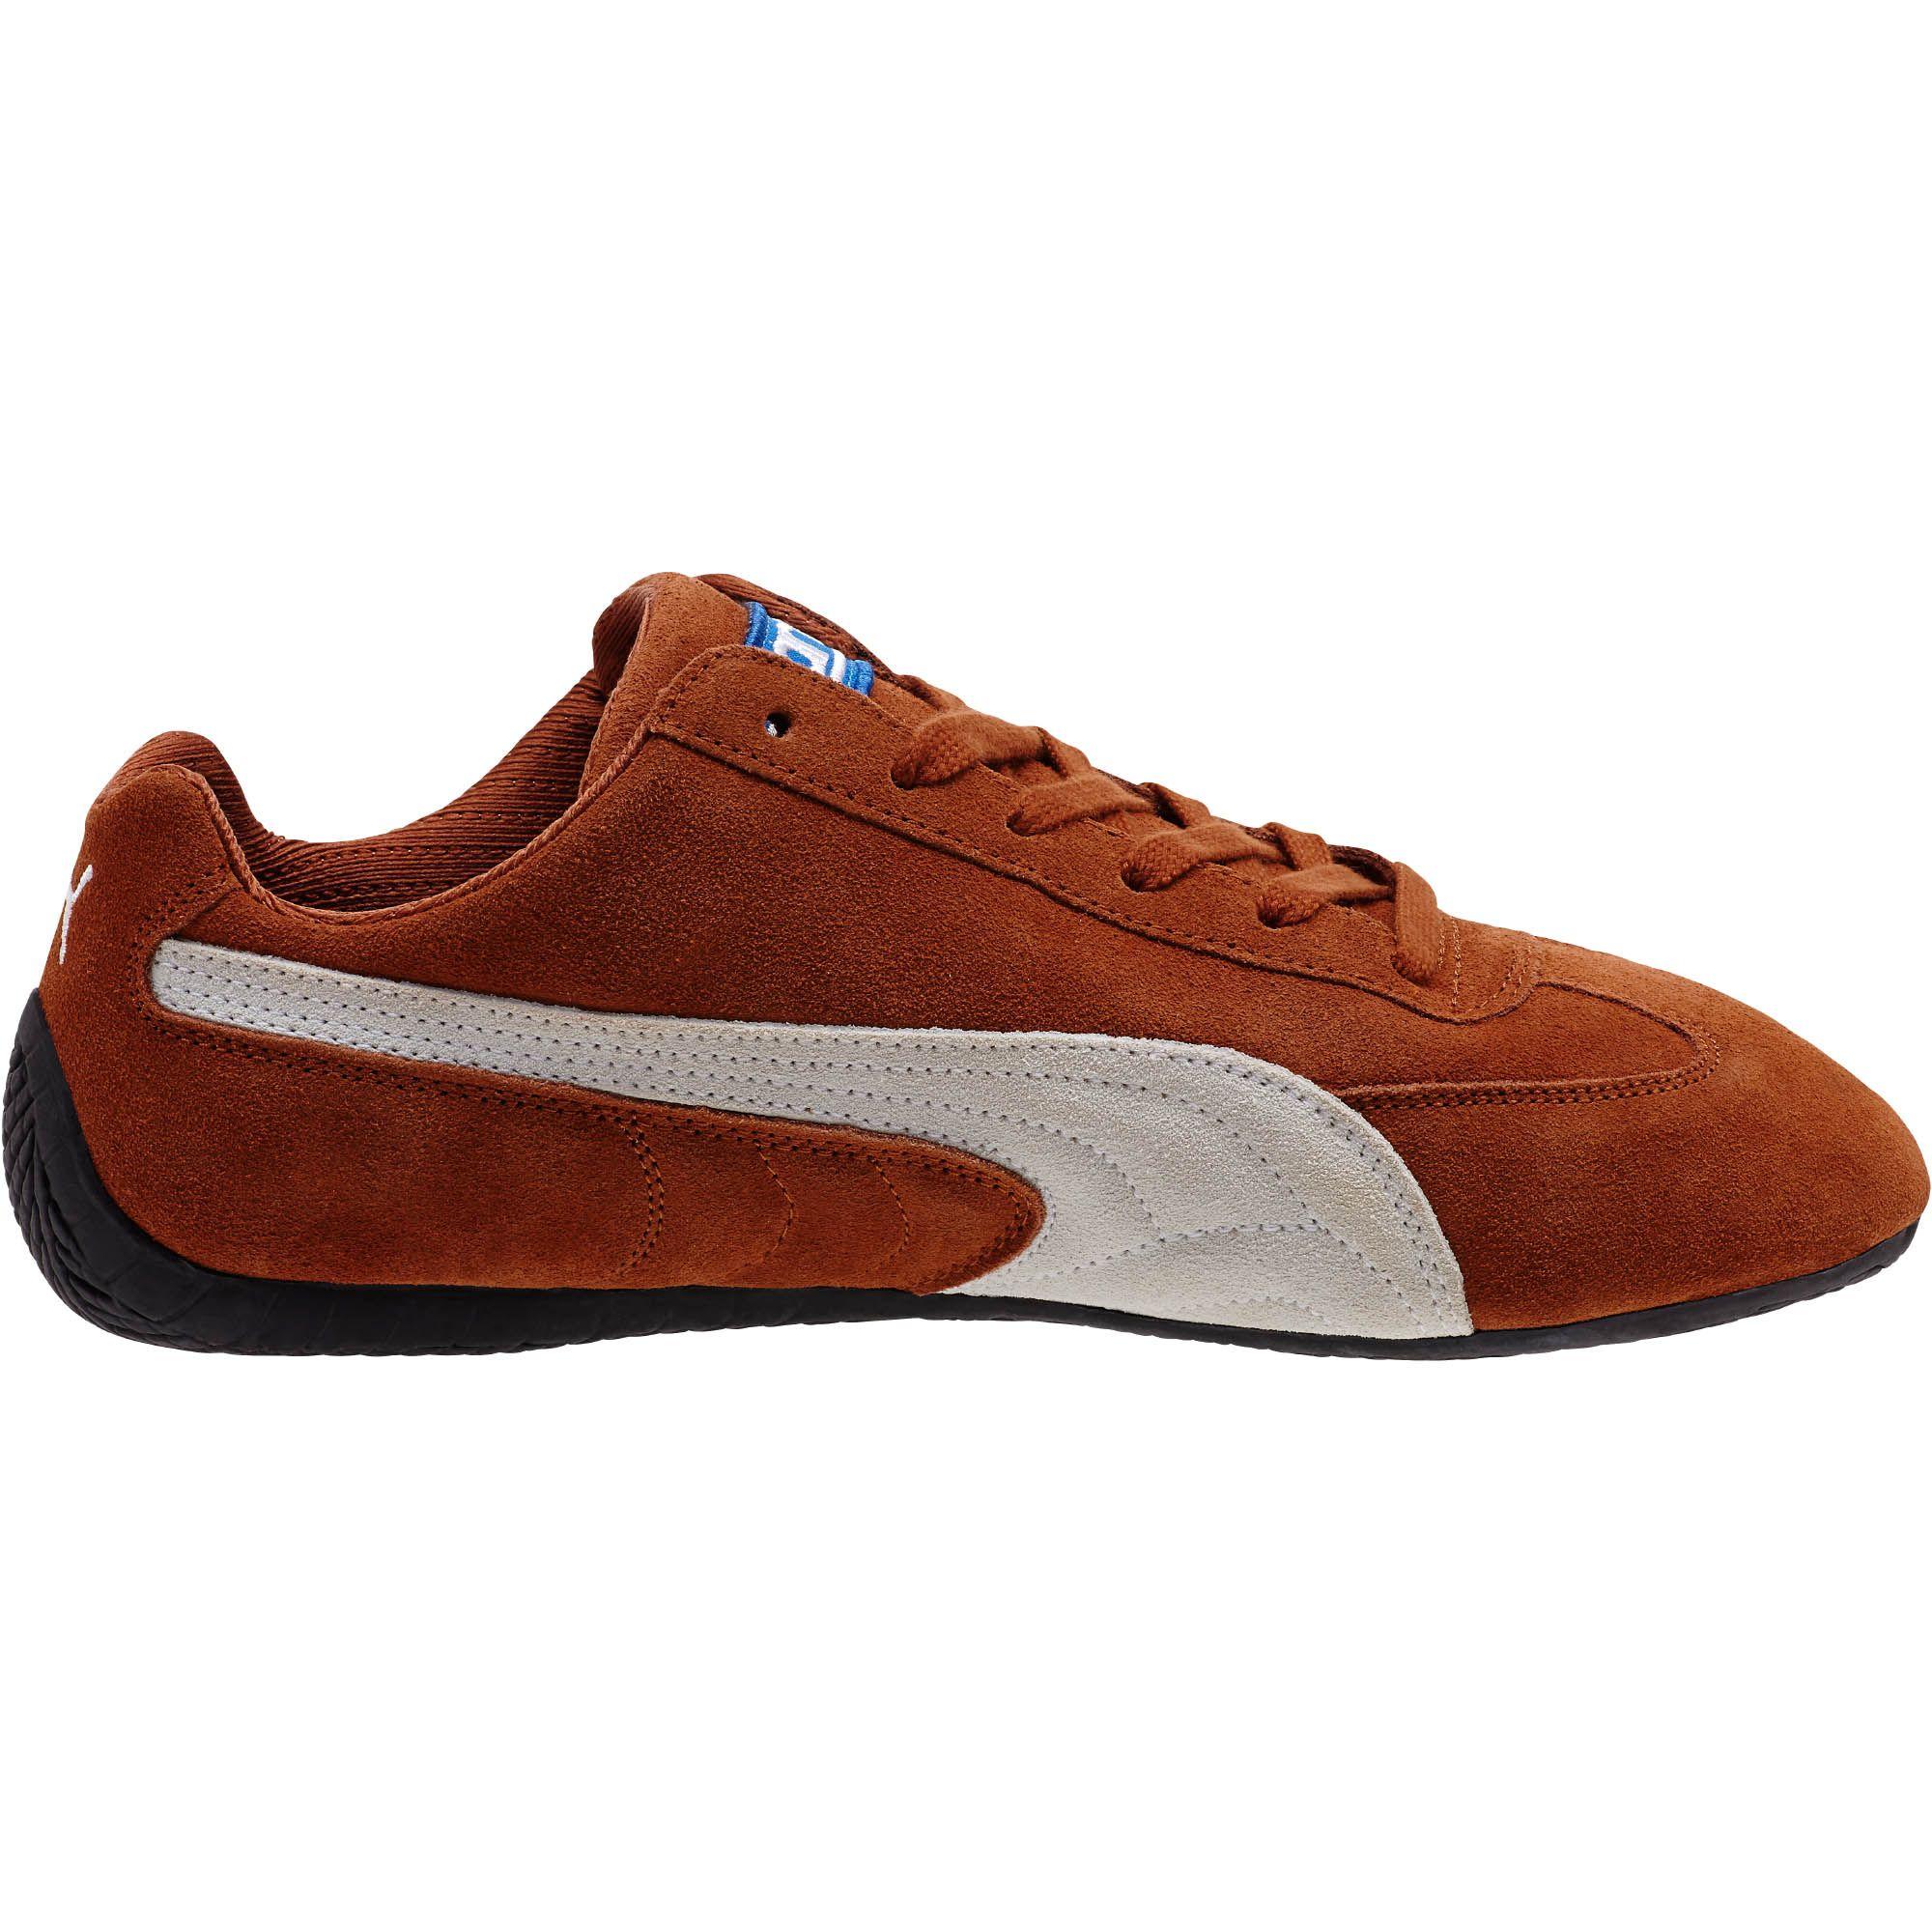 PUMA Suede Speed Cat Shoes in Brown for Men - Lyst